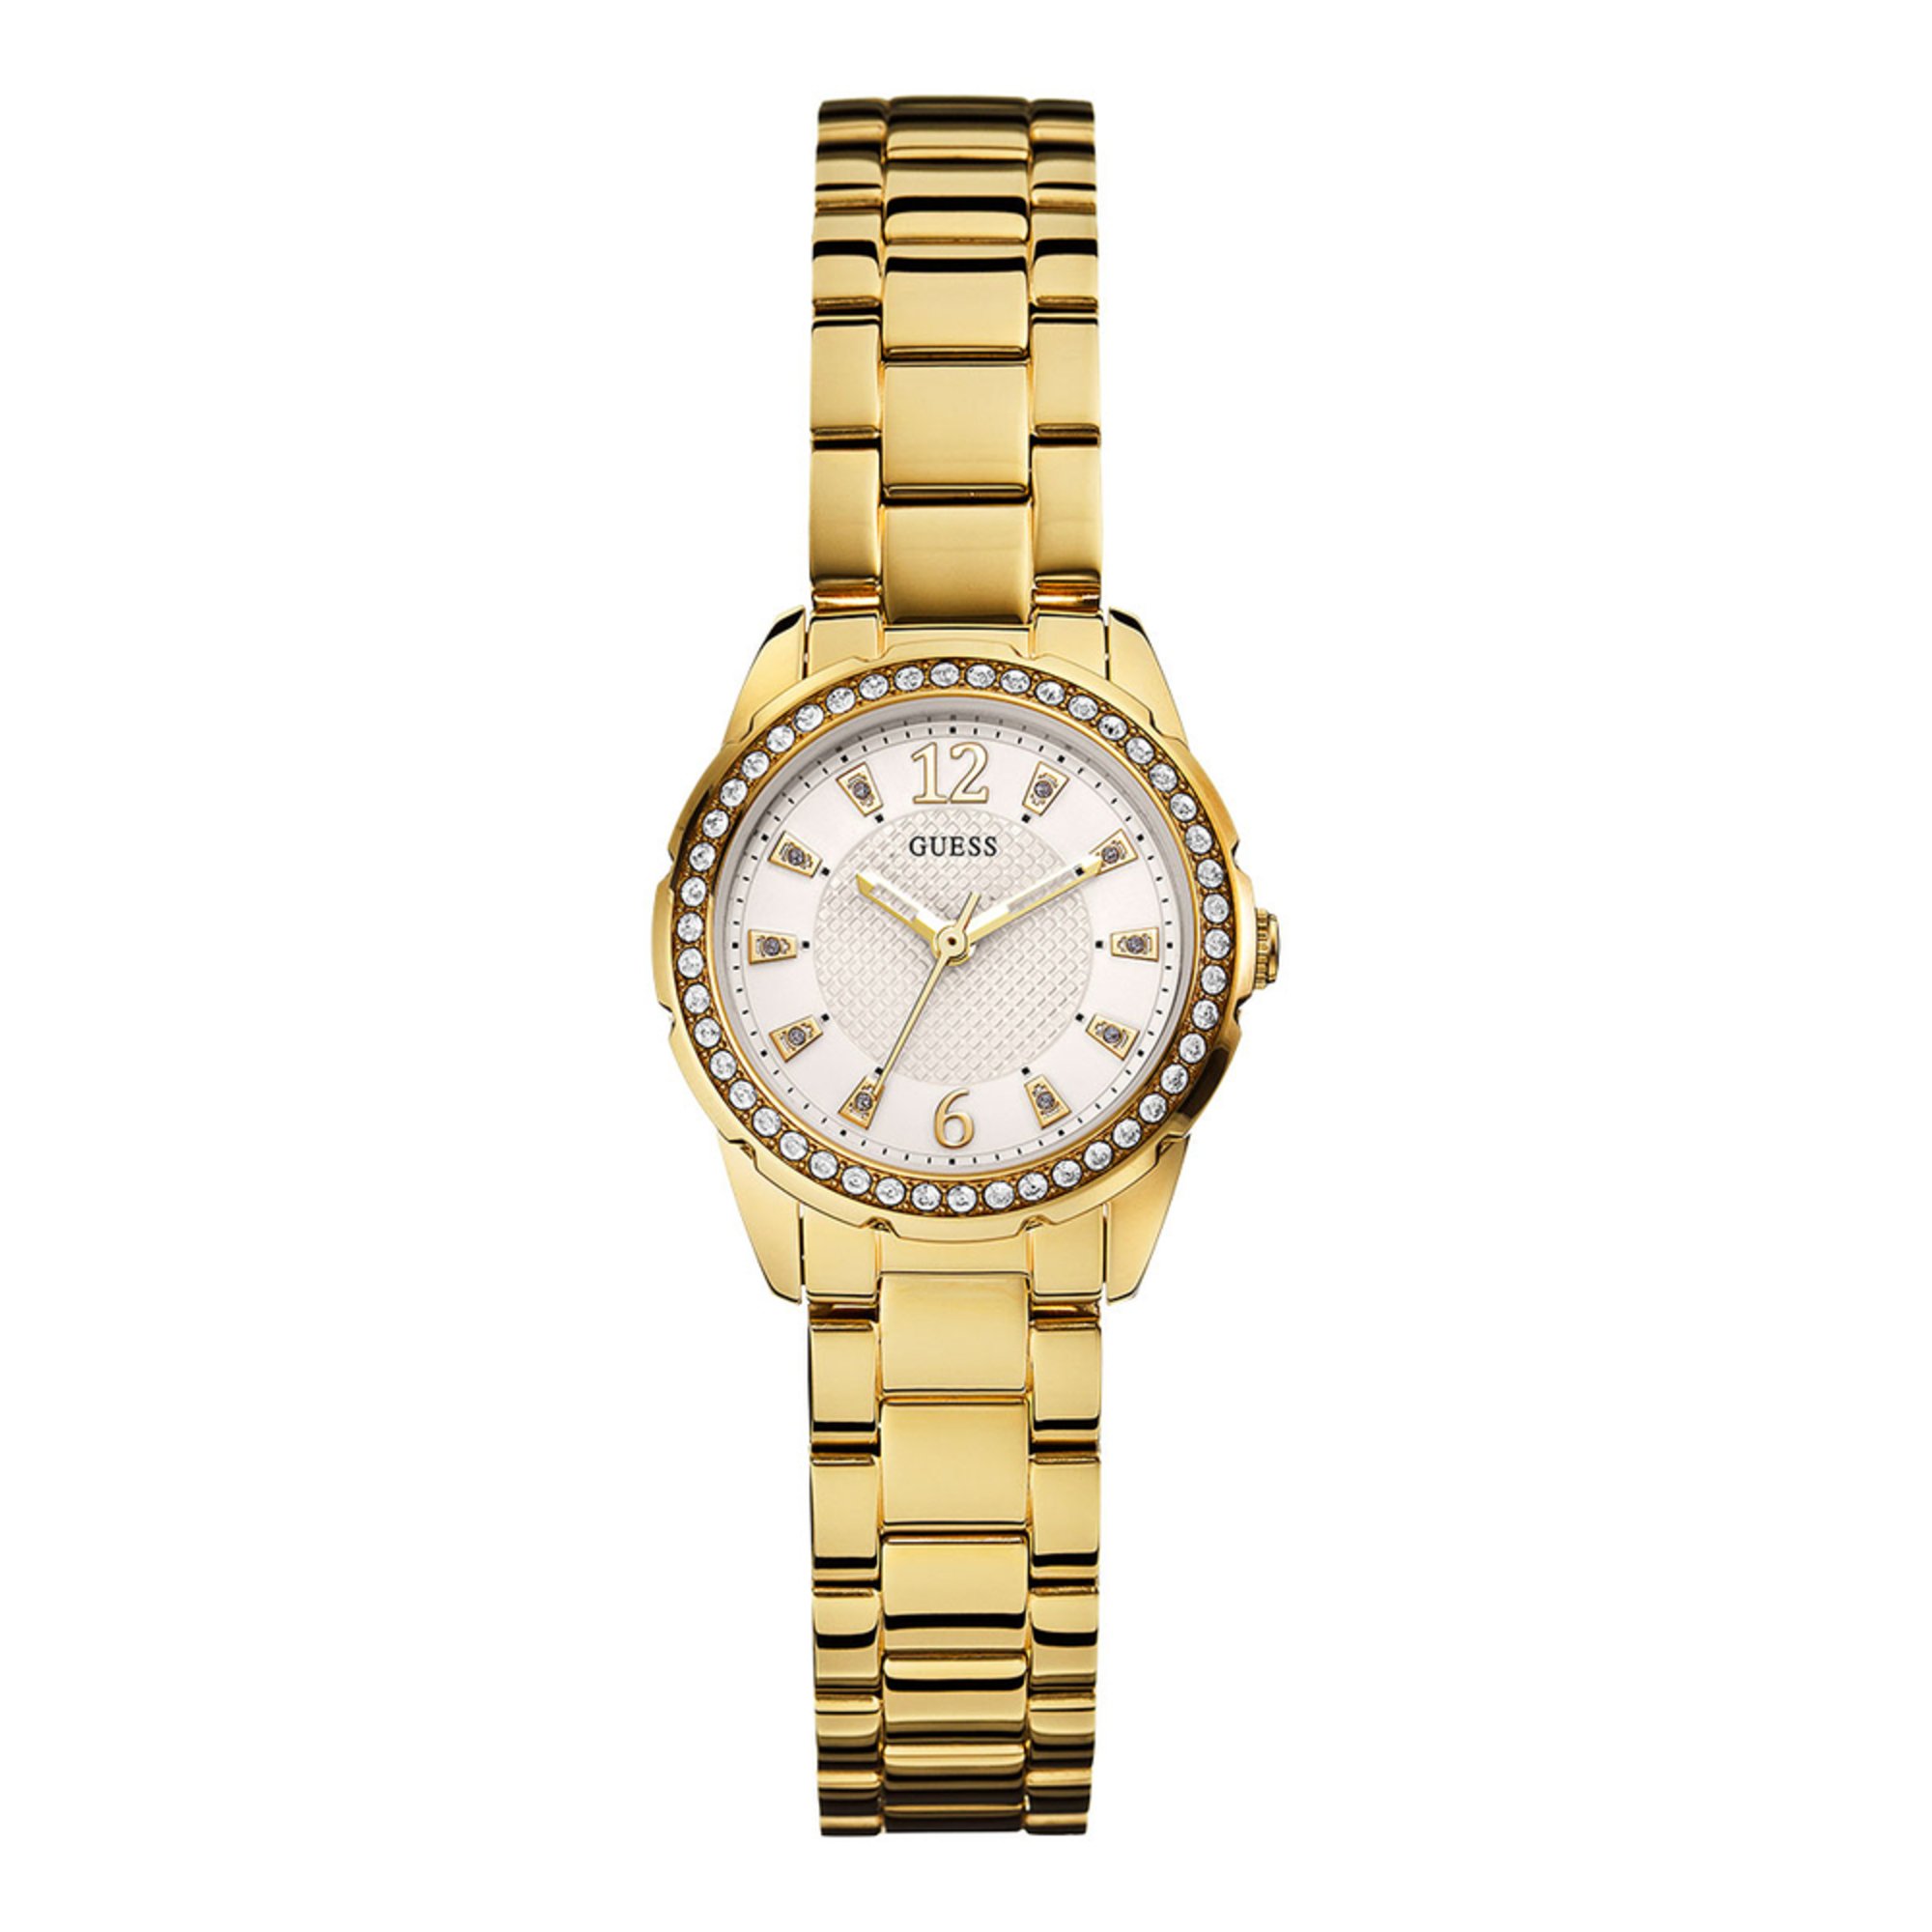 guess guess women s desire gold watch based on 0 reviews msrp $ 95 00 ...